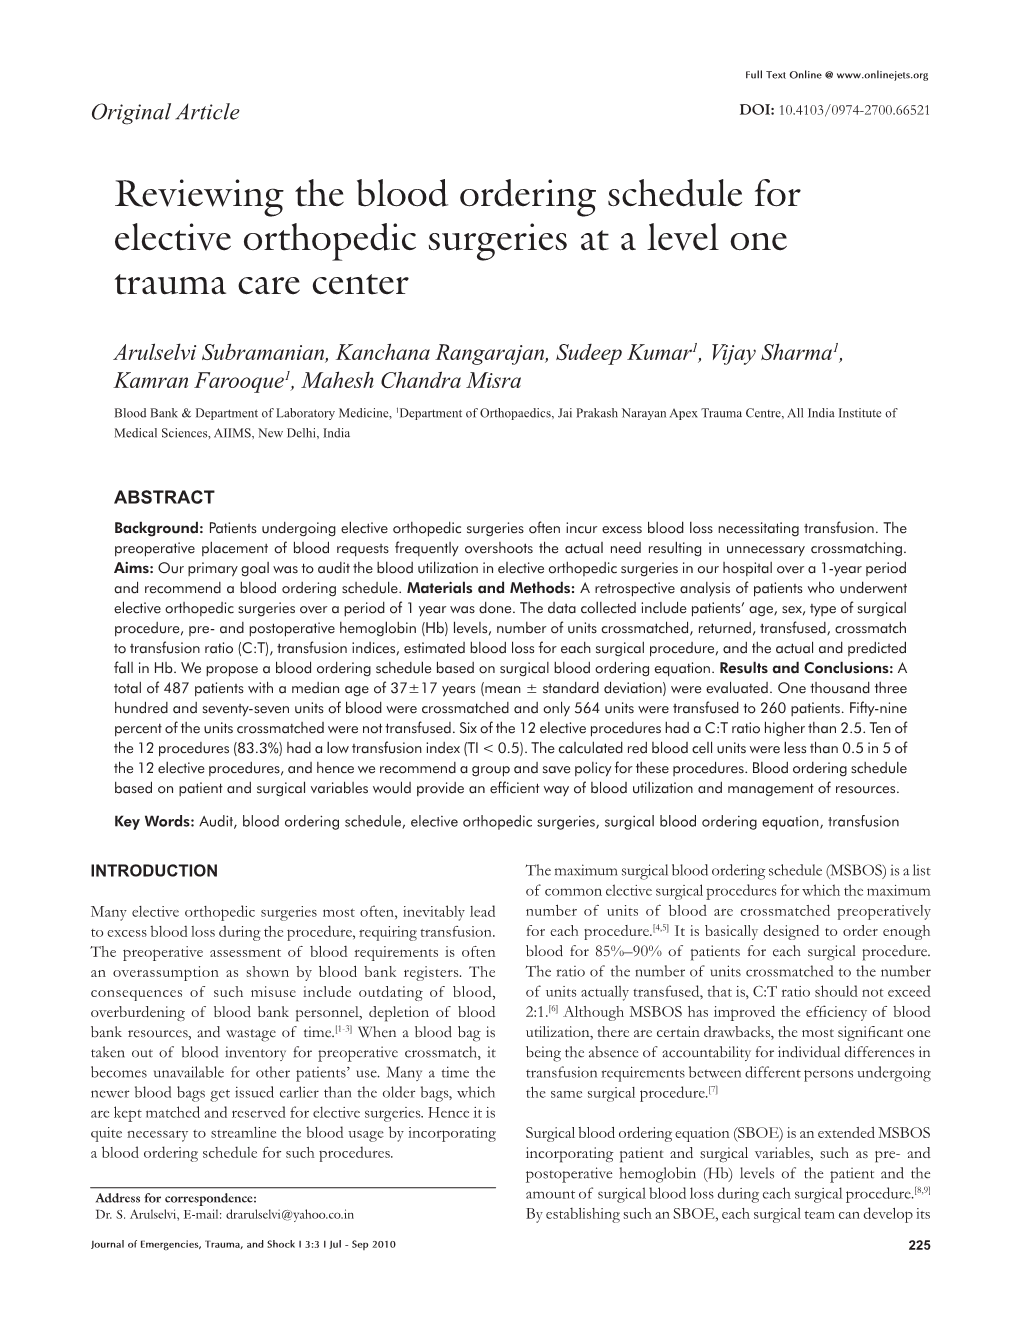 Reviewing the Blood Ordering Schedule for Elective Orthopedic Surgeries at a Level One Trauma Care Center